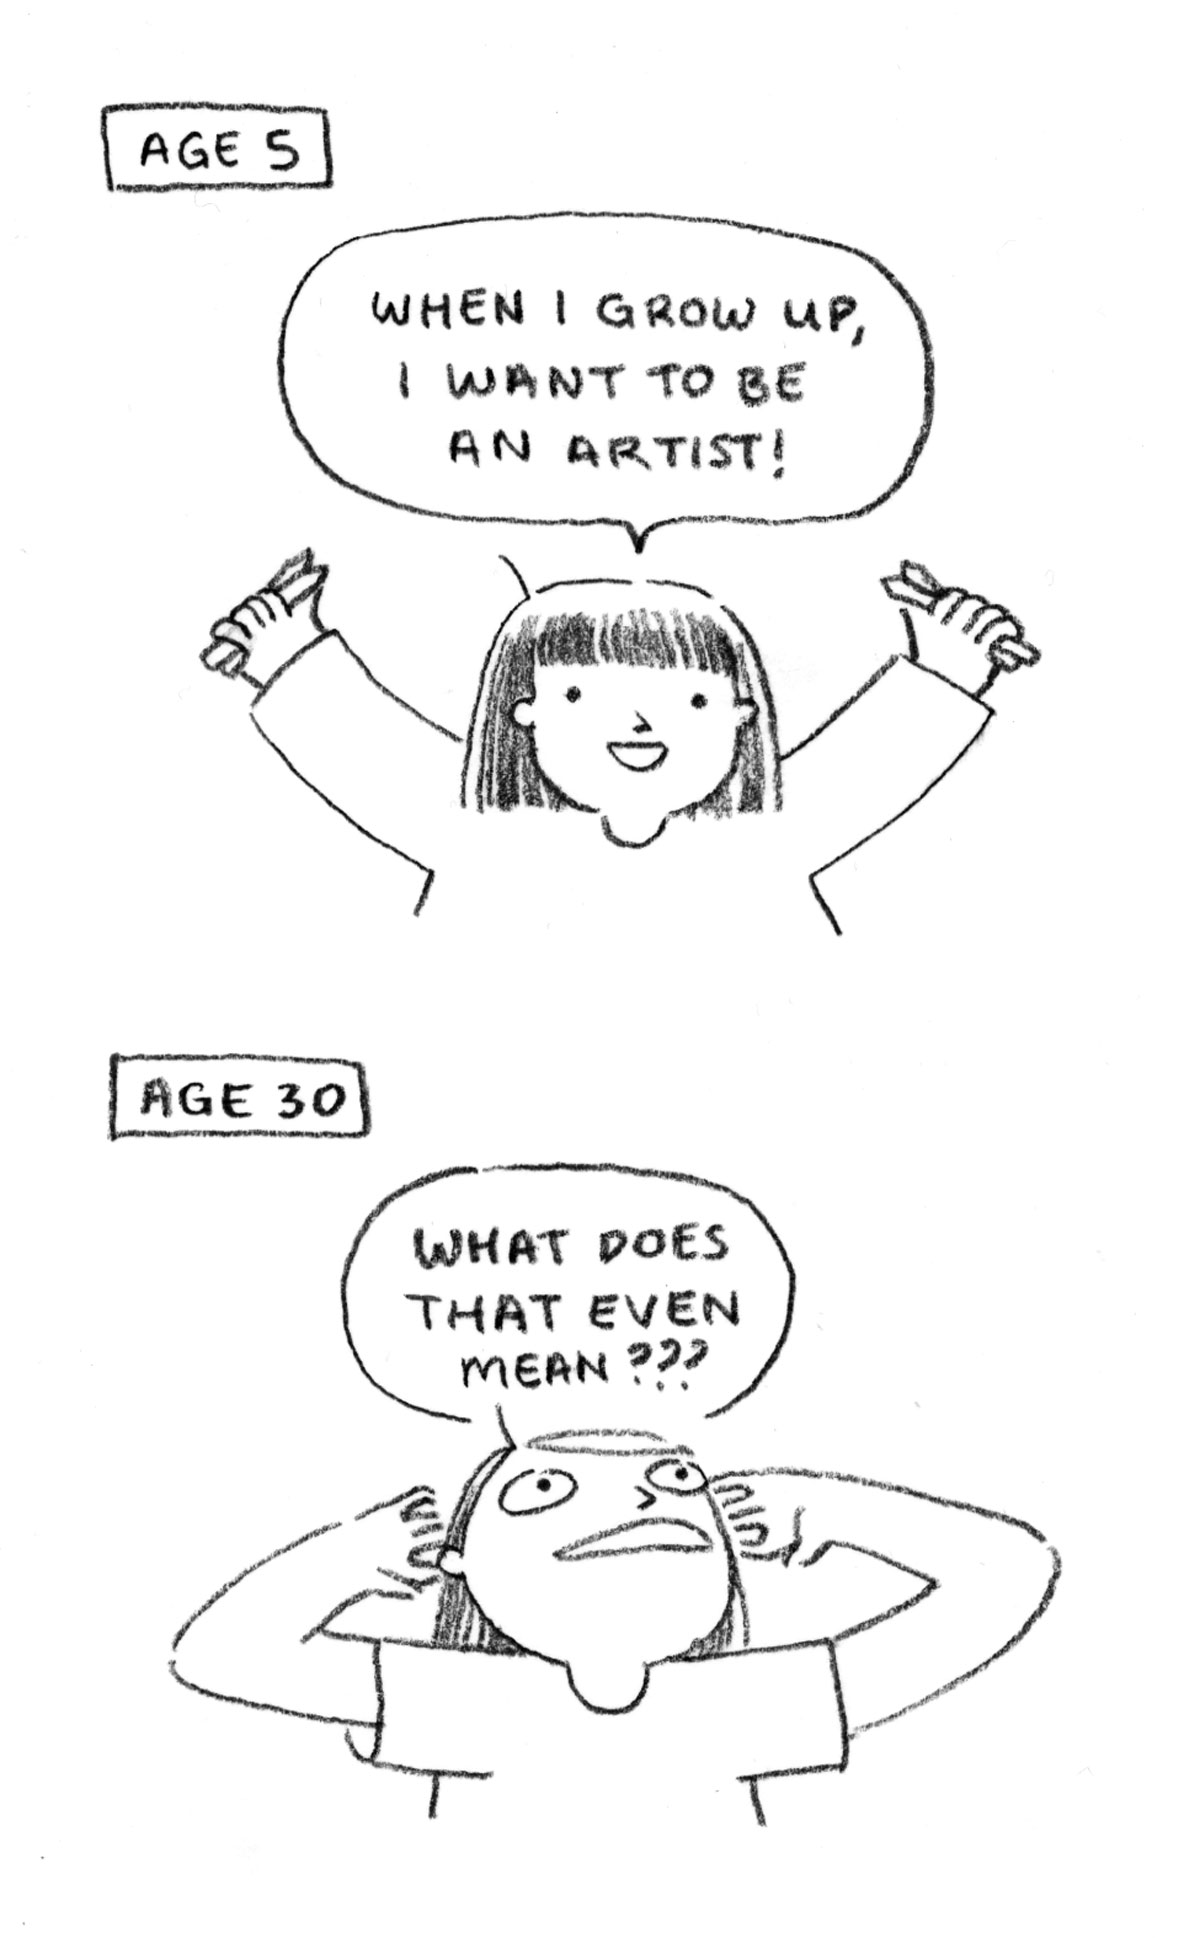 Two panel black and white comic. Panel 1: In the corner, a small label reads, 'Age 5.' The artist is shown as a small child with bangs. Her hands hold crayons and are thrown up in the air. With an excited expression, she yells, 'When I grow up, I want to be an artist!' Panel 2: A label reads, 'Age 30'. The artist is shown as an adult, her eyes bulging out and hands grasping the air near her head, yelling, 'What does that even mean ???' Note the artist is now older than 30. She still does not know what that means.